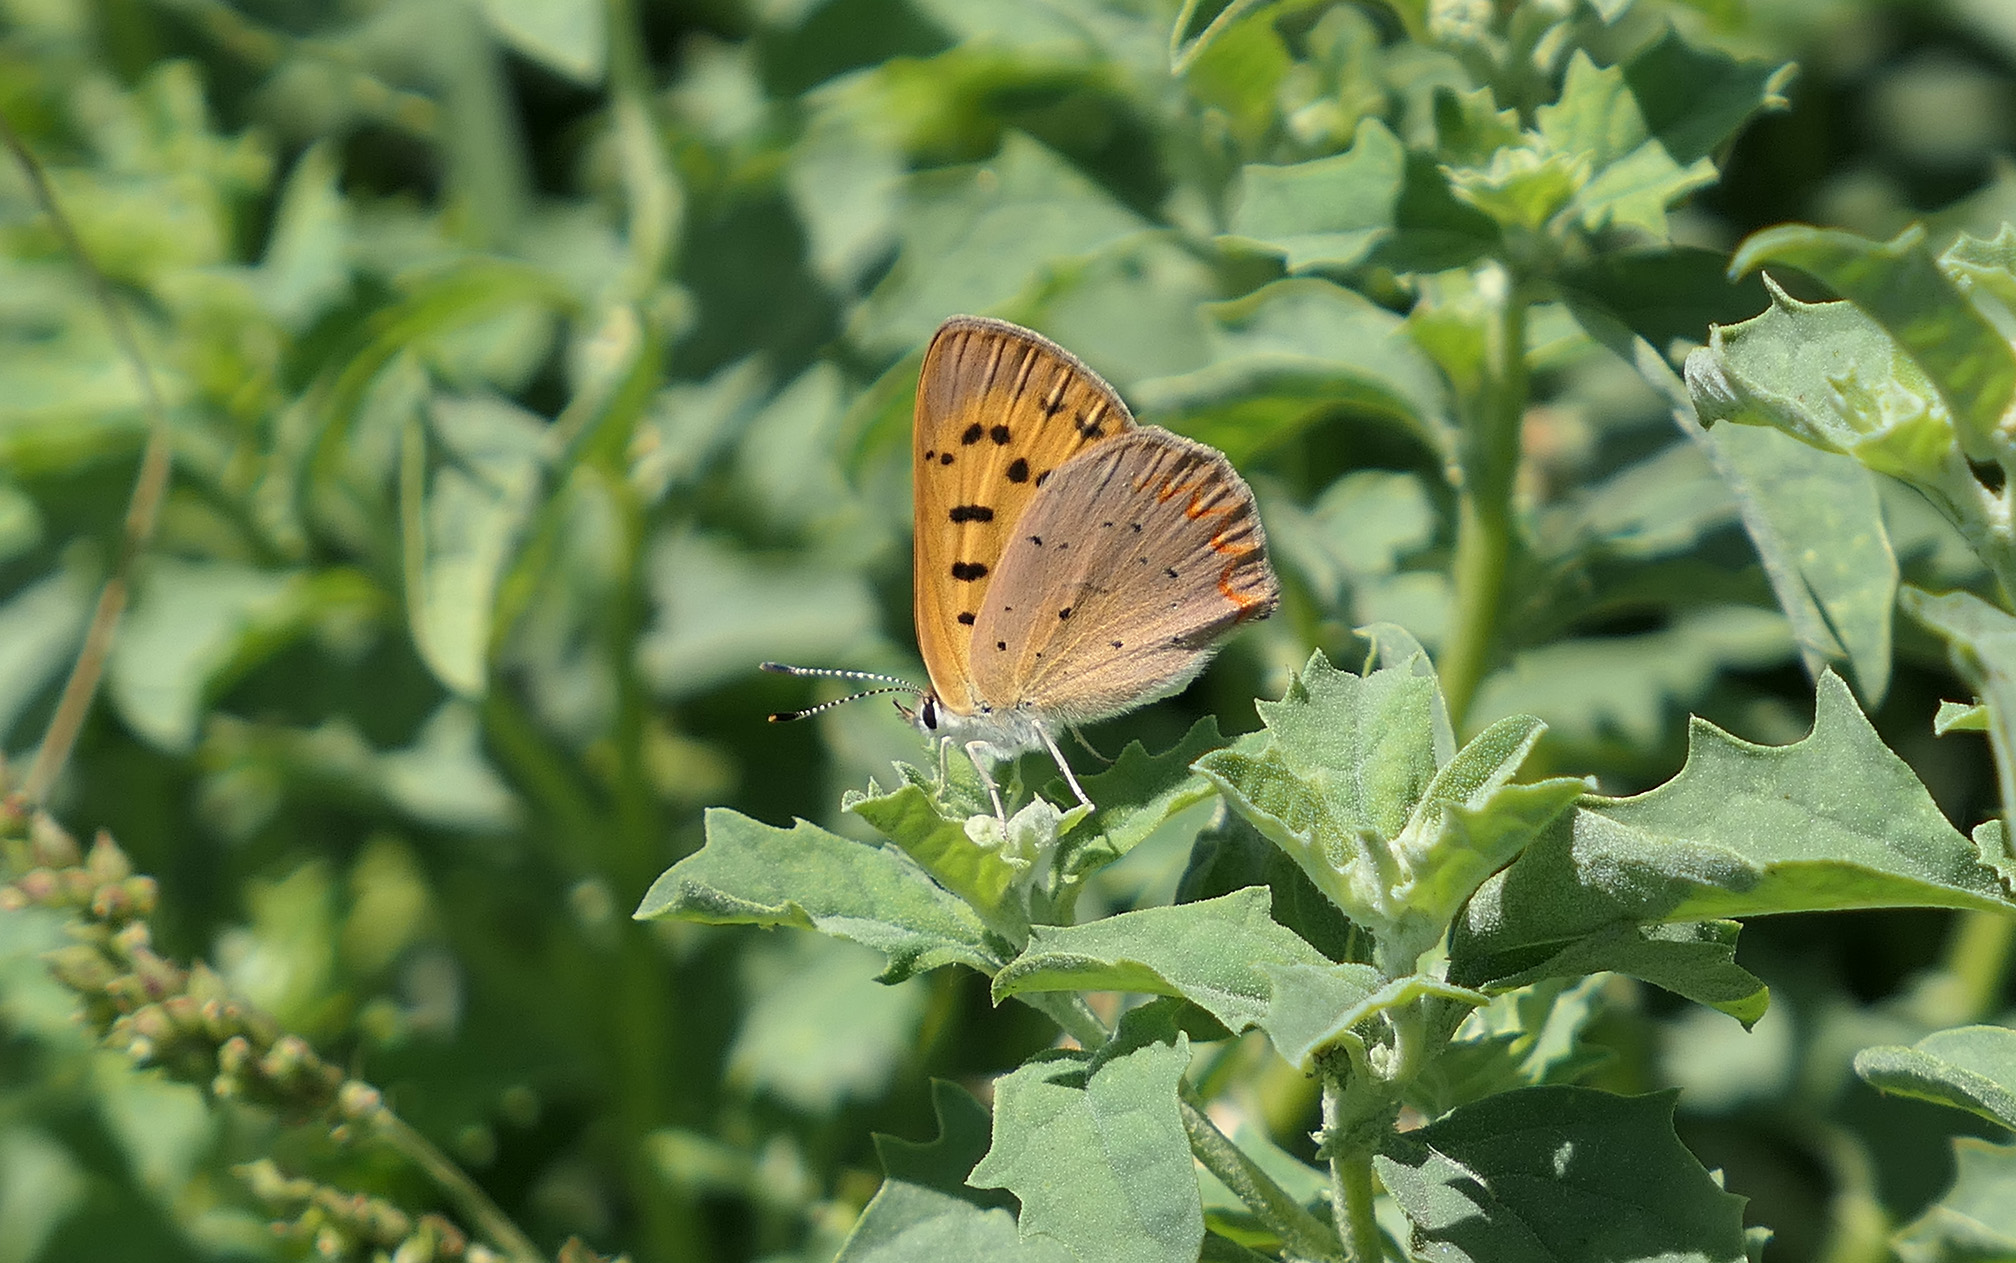 On the green leaves of a plant sits a small butterfly. It is holding its wings above its body. It's wings are orange-brown with a slight purple tint. There are black spots on the wings and a row of orange crescents along the edge.